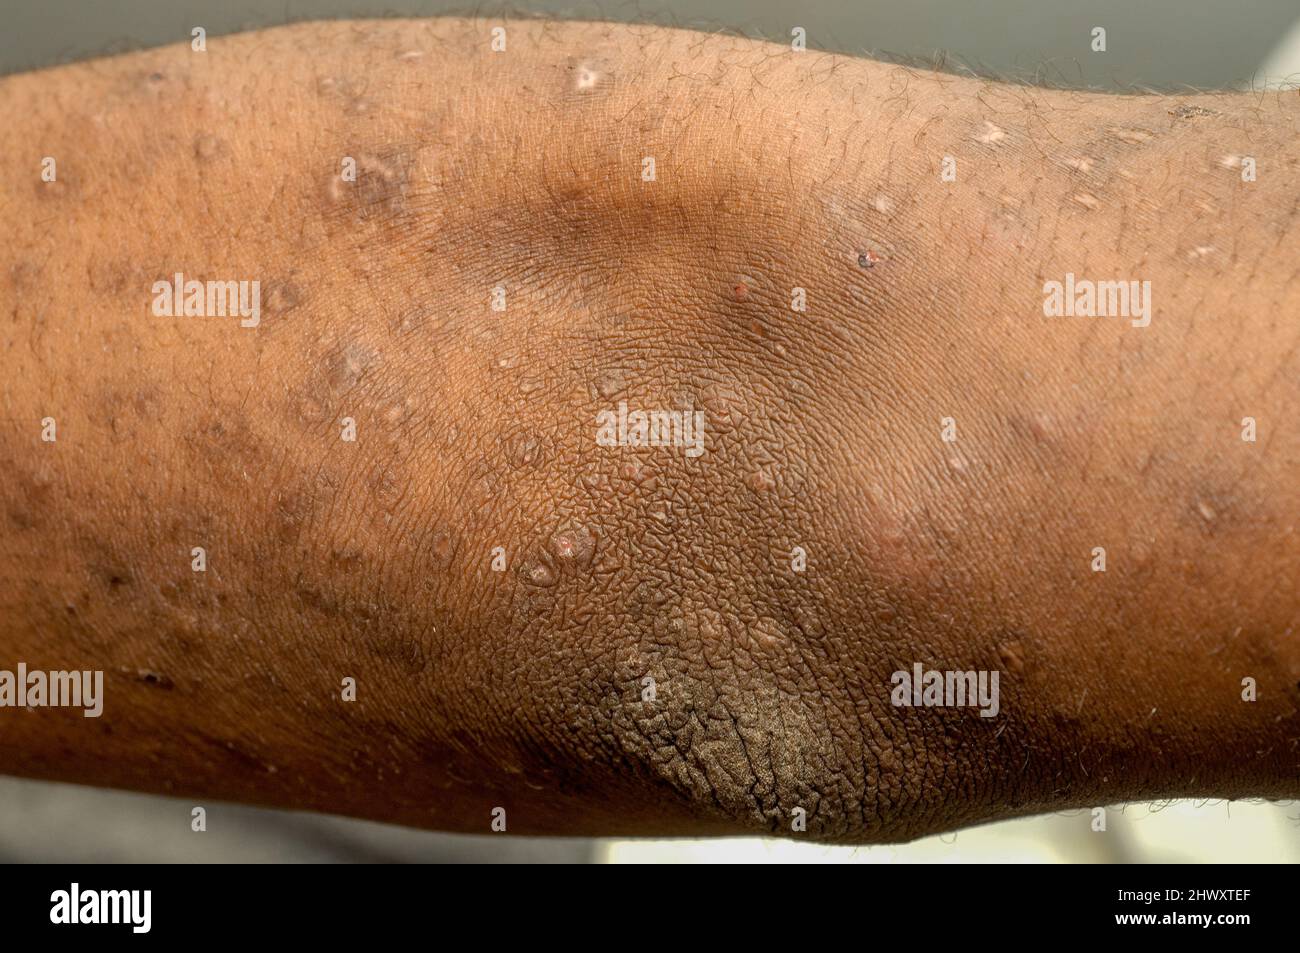 The arm of a patient with mild psoriasis Psoriasis is a common, chronic  relapsing/remitting immune-mediated skin disease characterized by red,  scaly p Stock Photo - Alamy